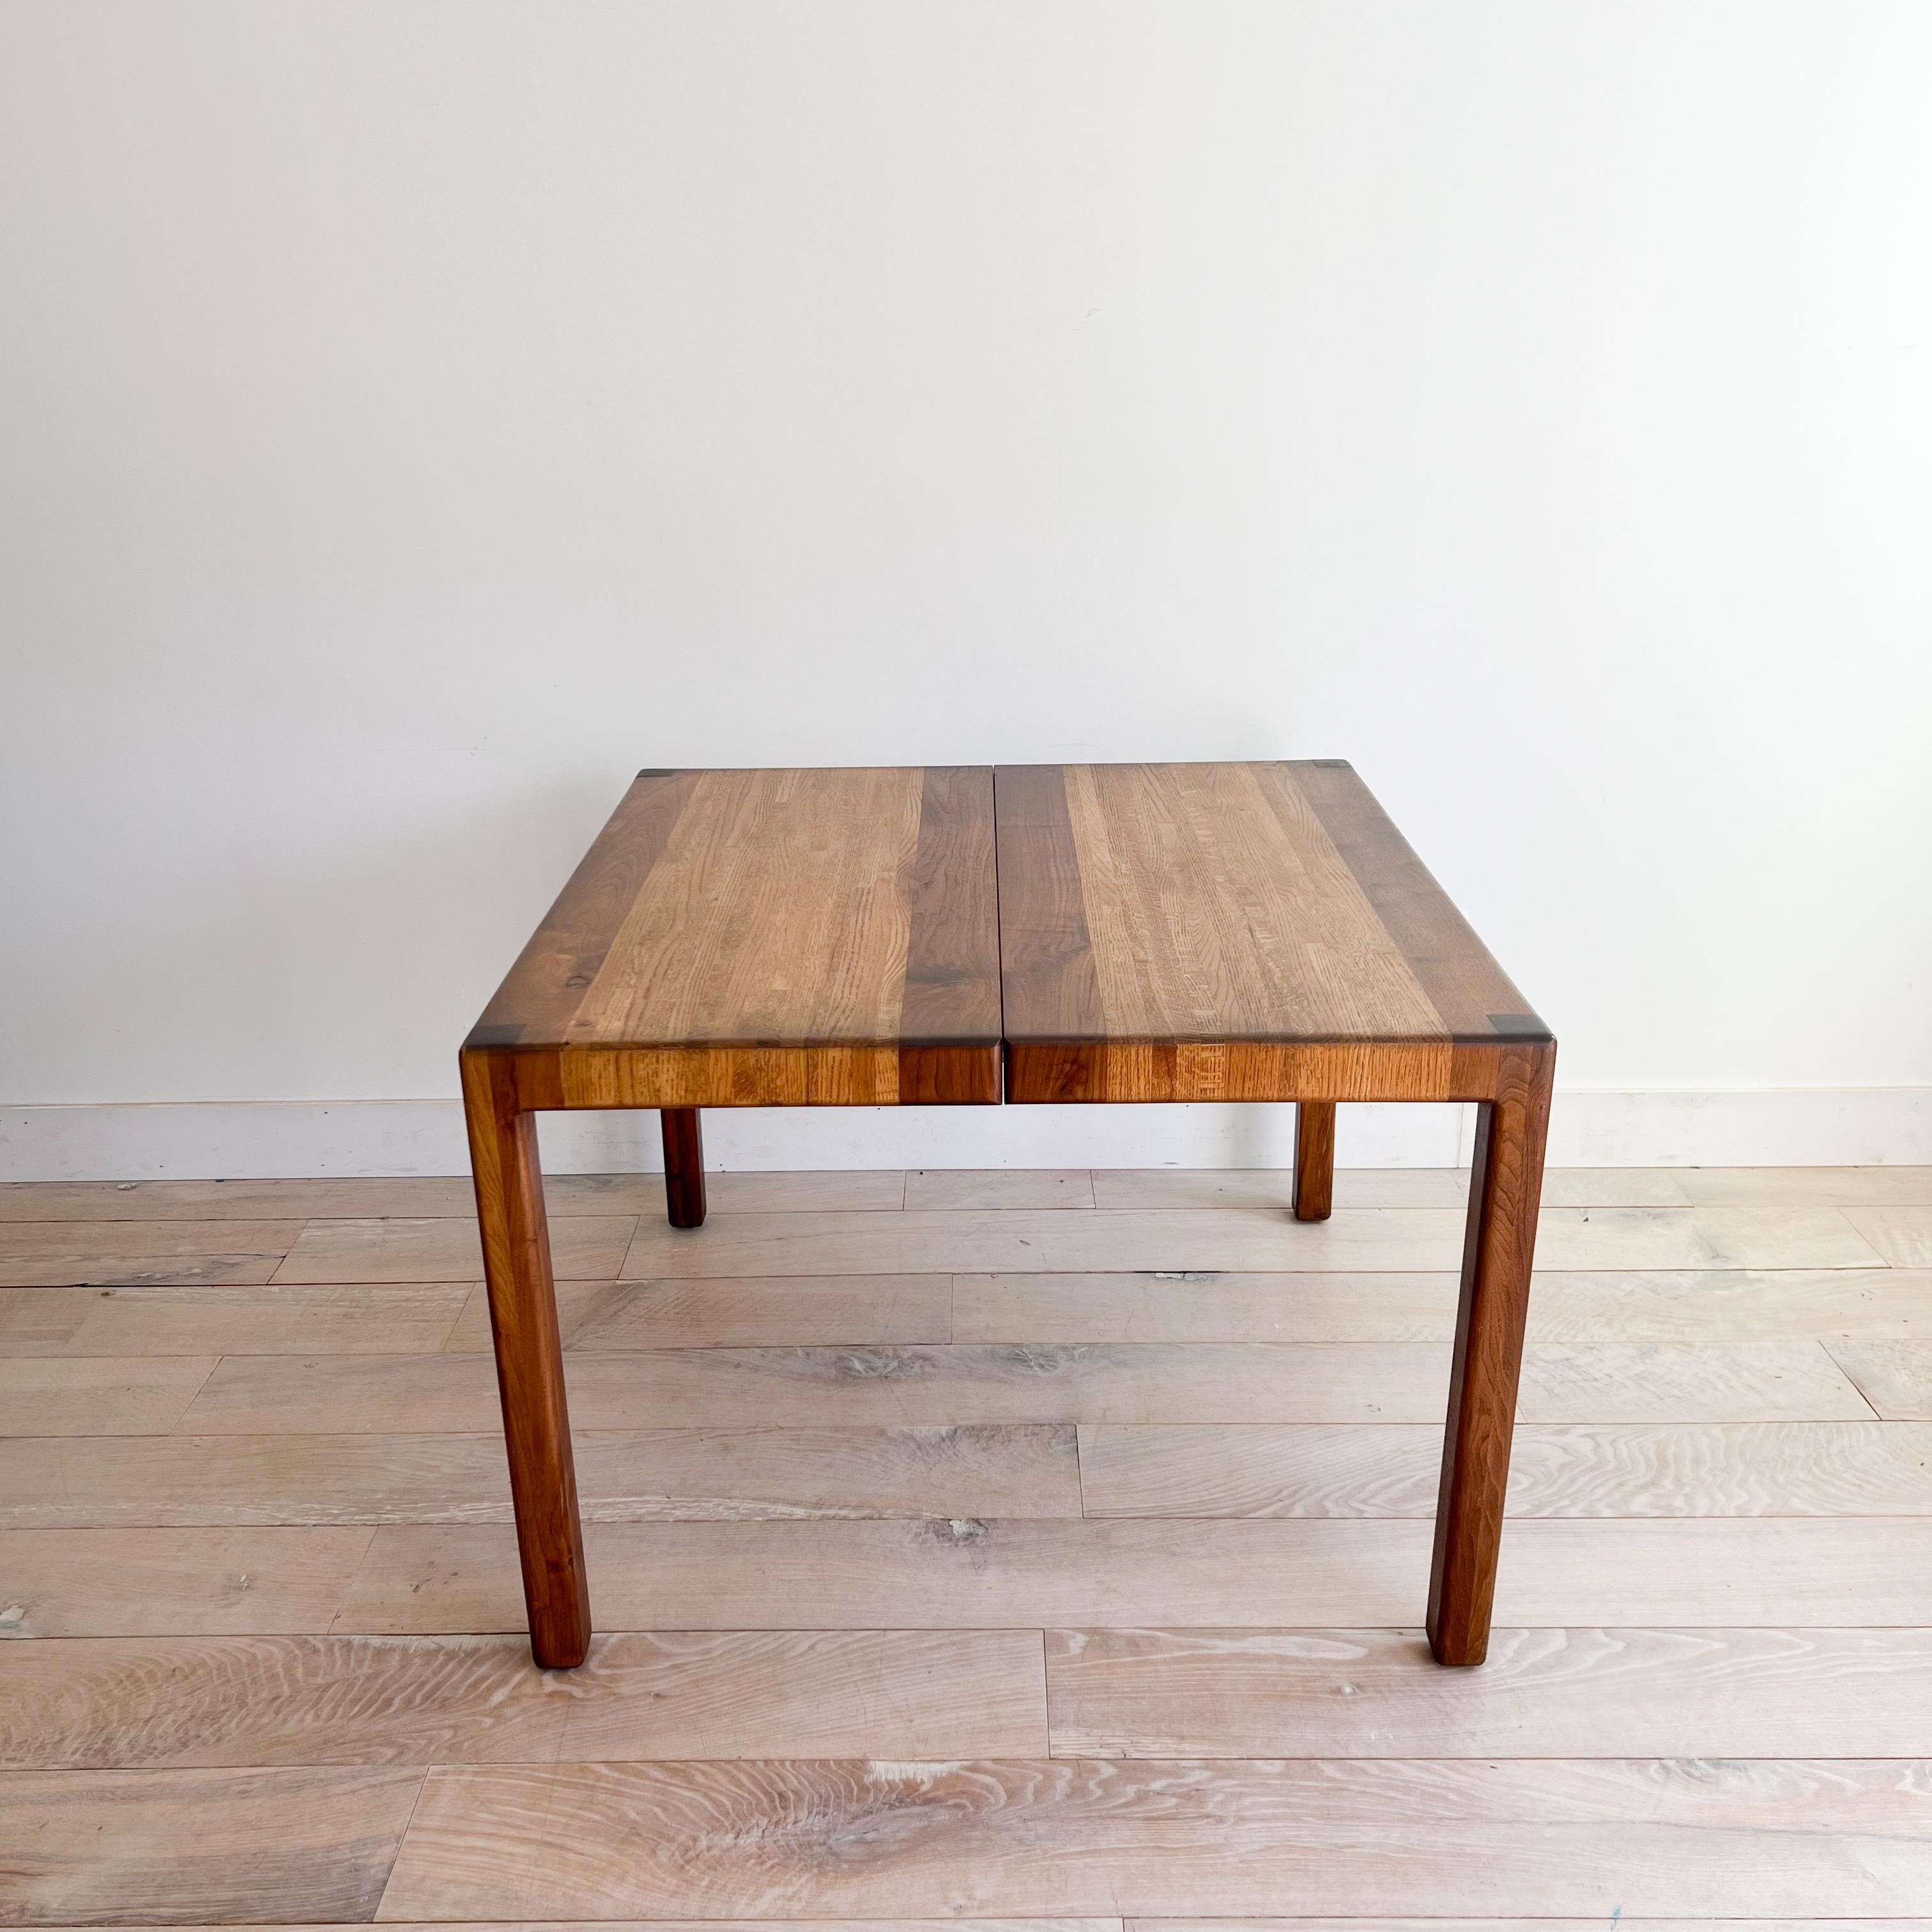 Add a touch of timeless elegance to your dining space with this exceptionally rare mid-century modern dining table designed by Lou Hodges in California. Crafted with precision from solid wood, including oak and walnut accents, this piece exudes